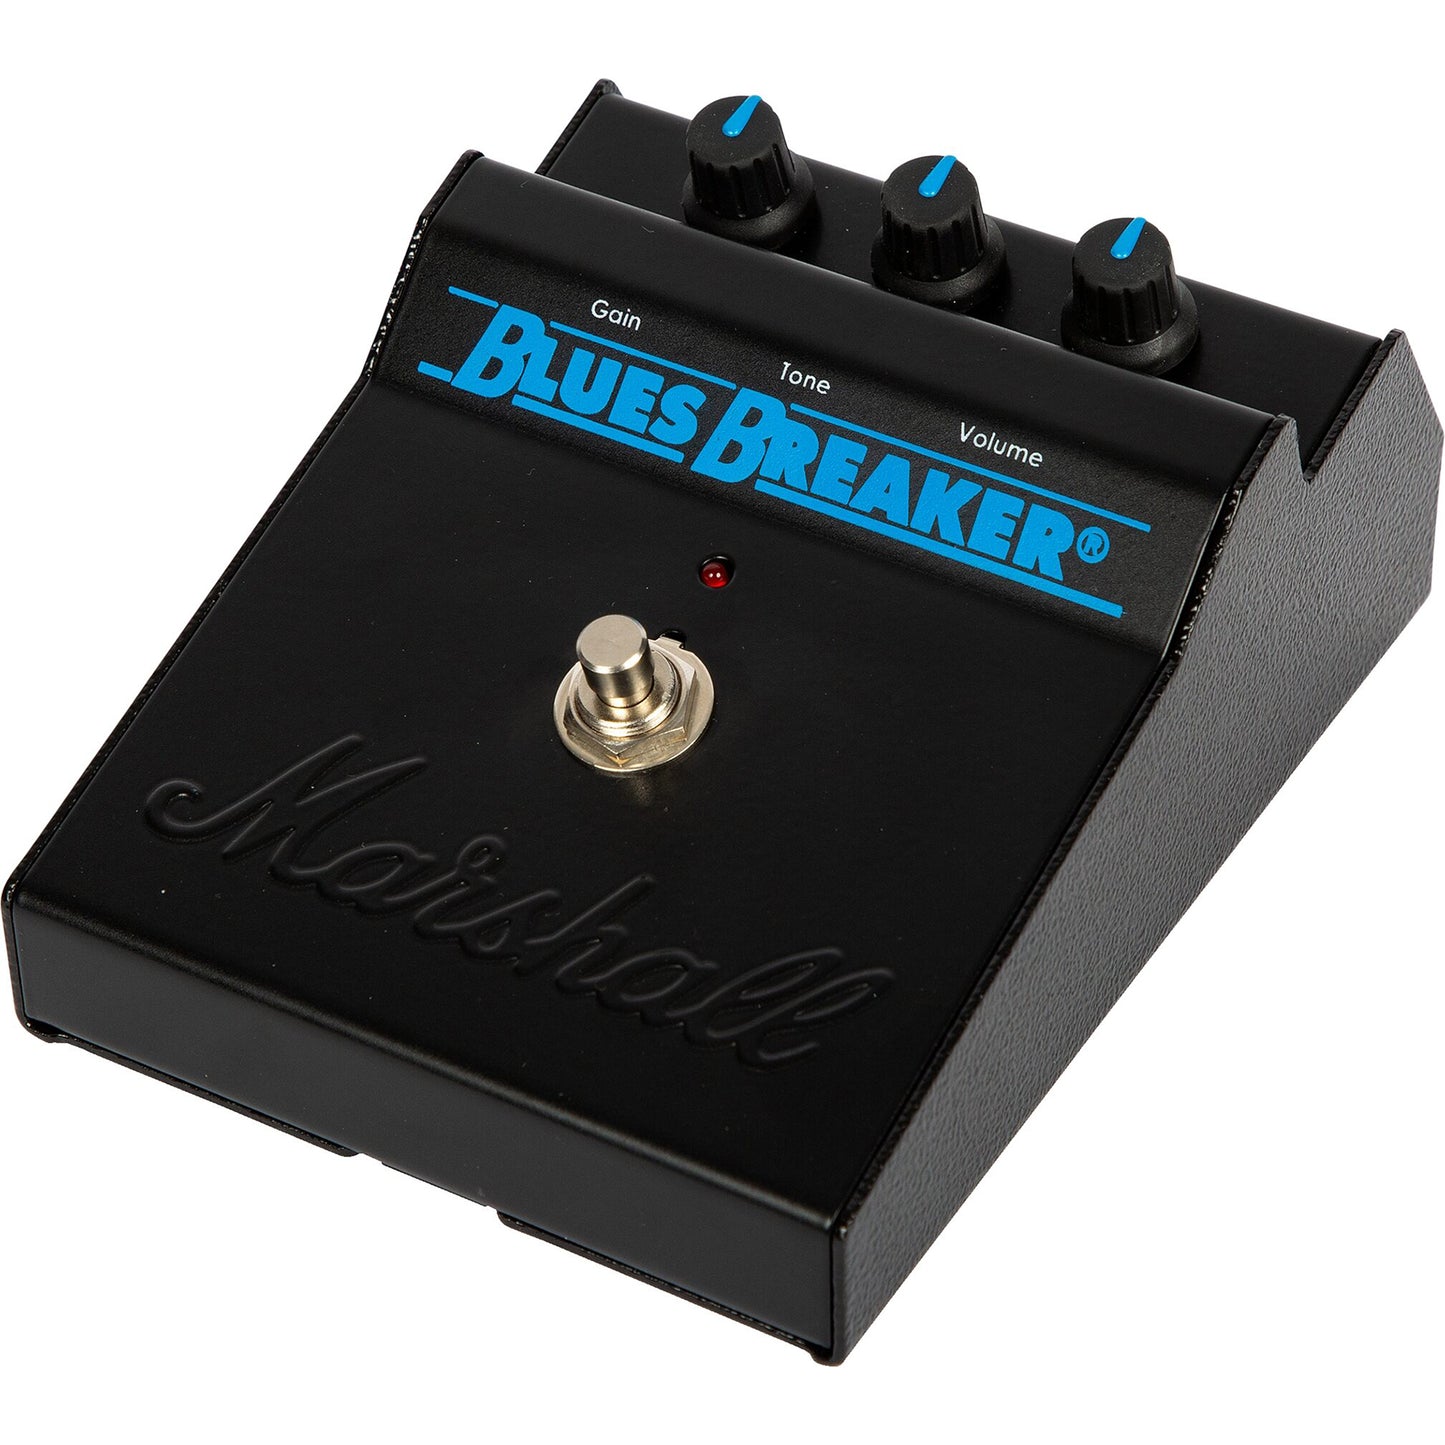 Marshall Limited Edition Blues Breaker Pedal